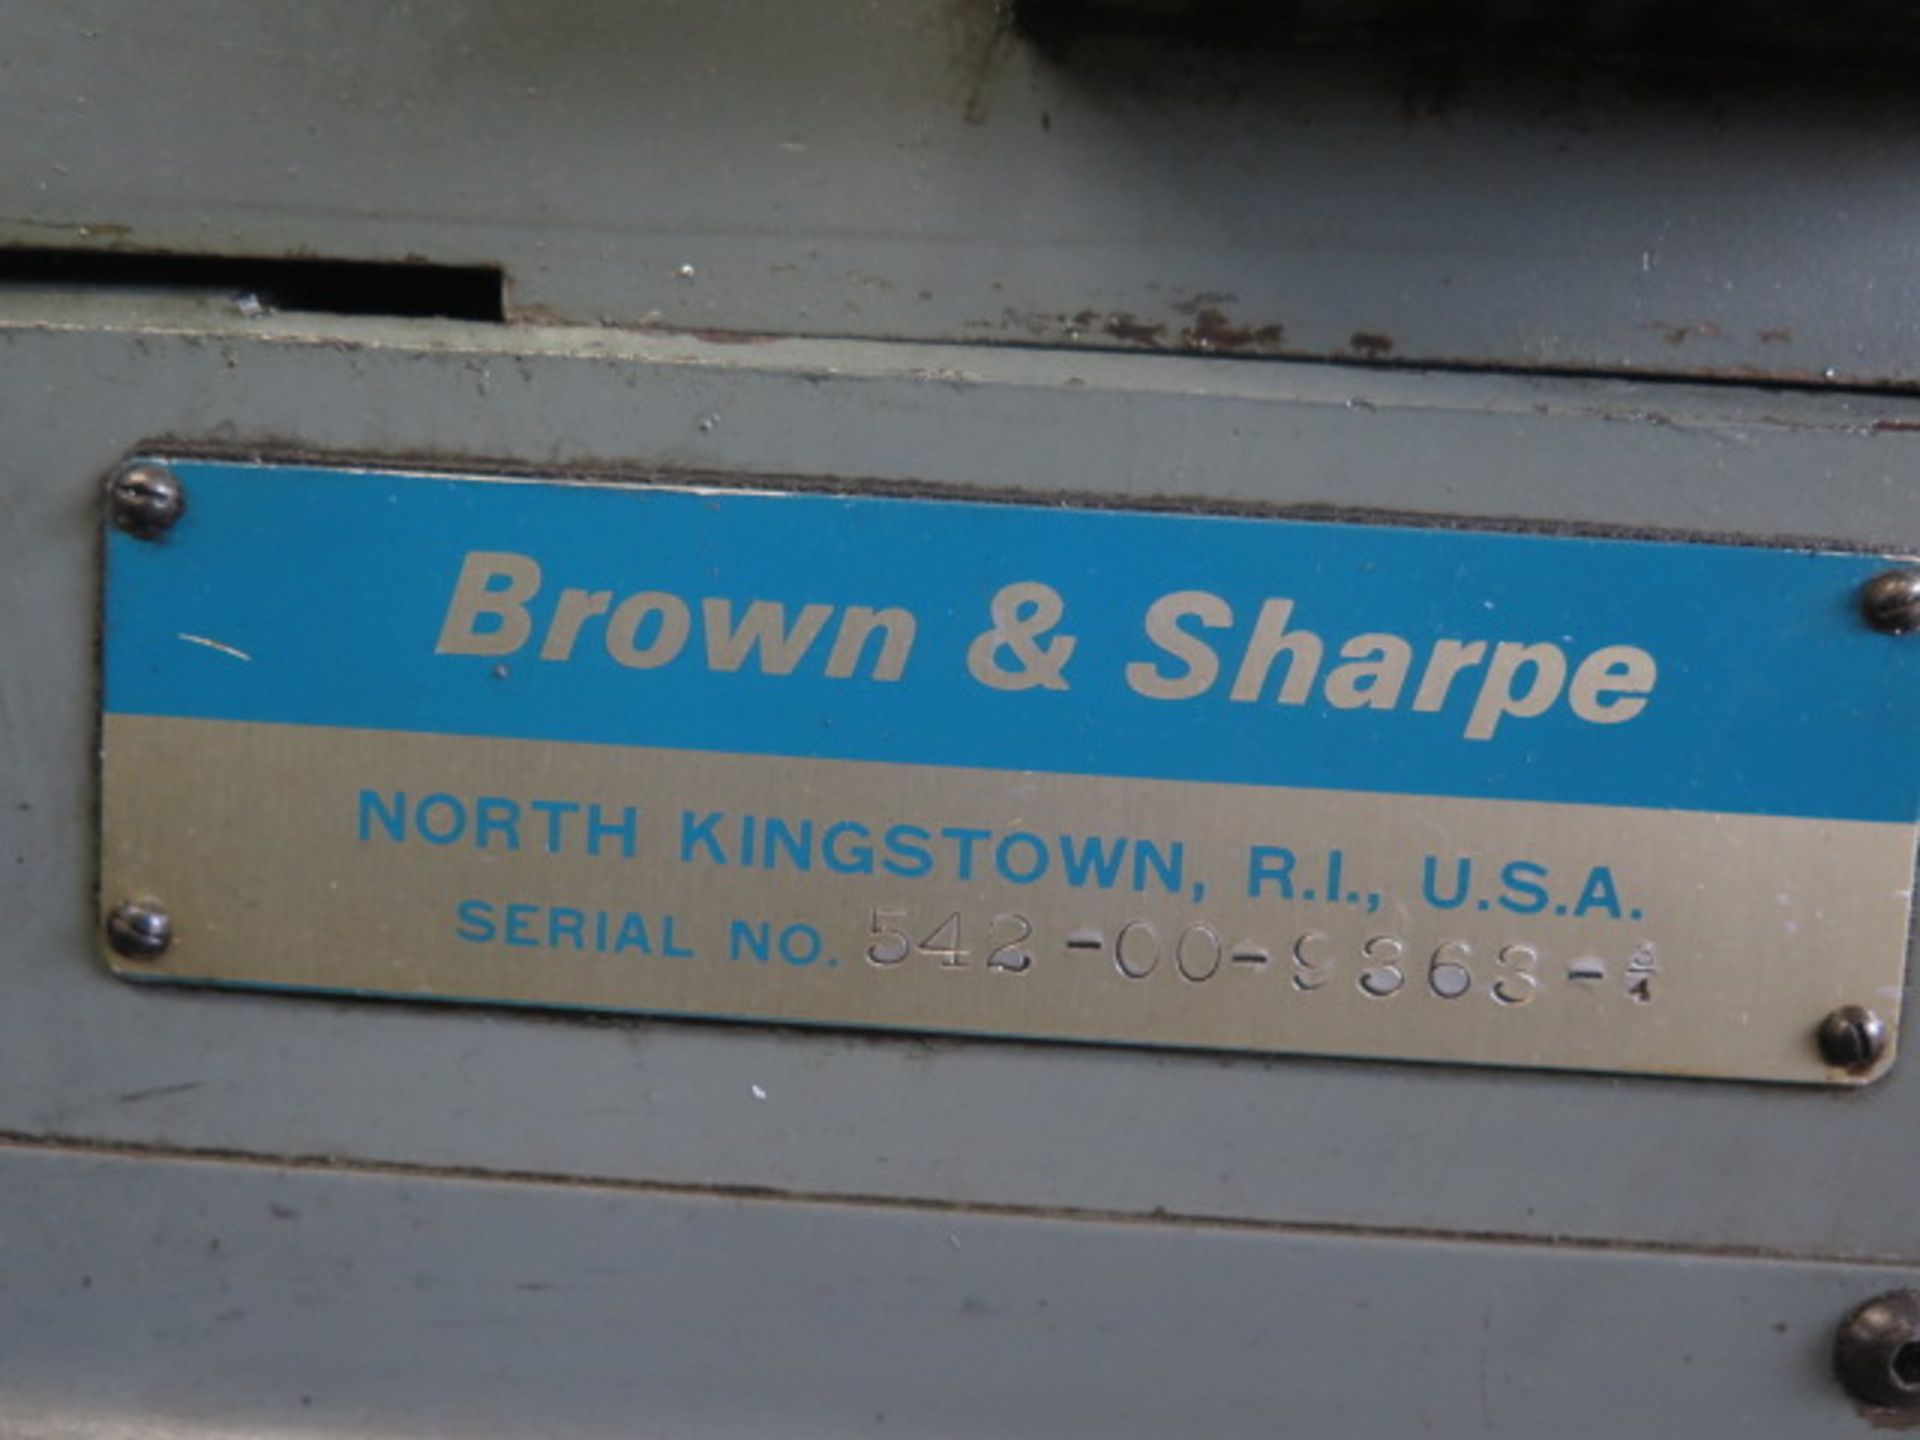 Brown & Sharpe Ultramatic R/S ¾” Cap Automatic Screw Machine s/n 542-00-9363-3/4 w/ 6-Station - Image 9 of 9